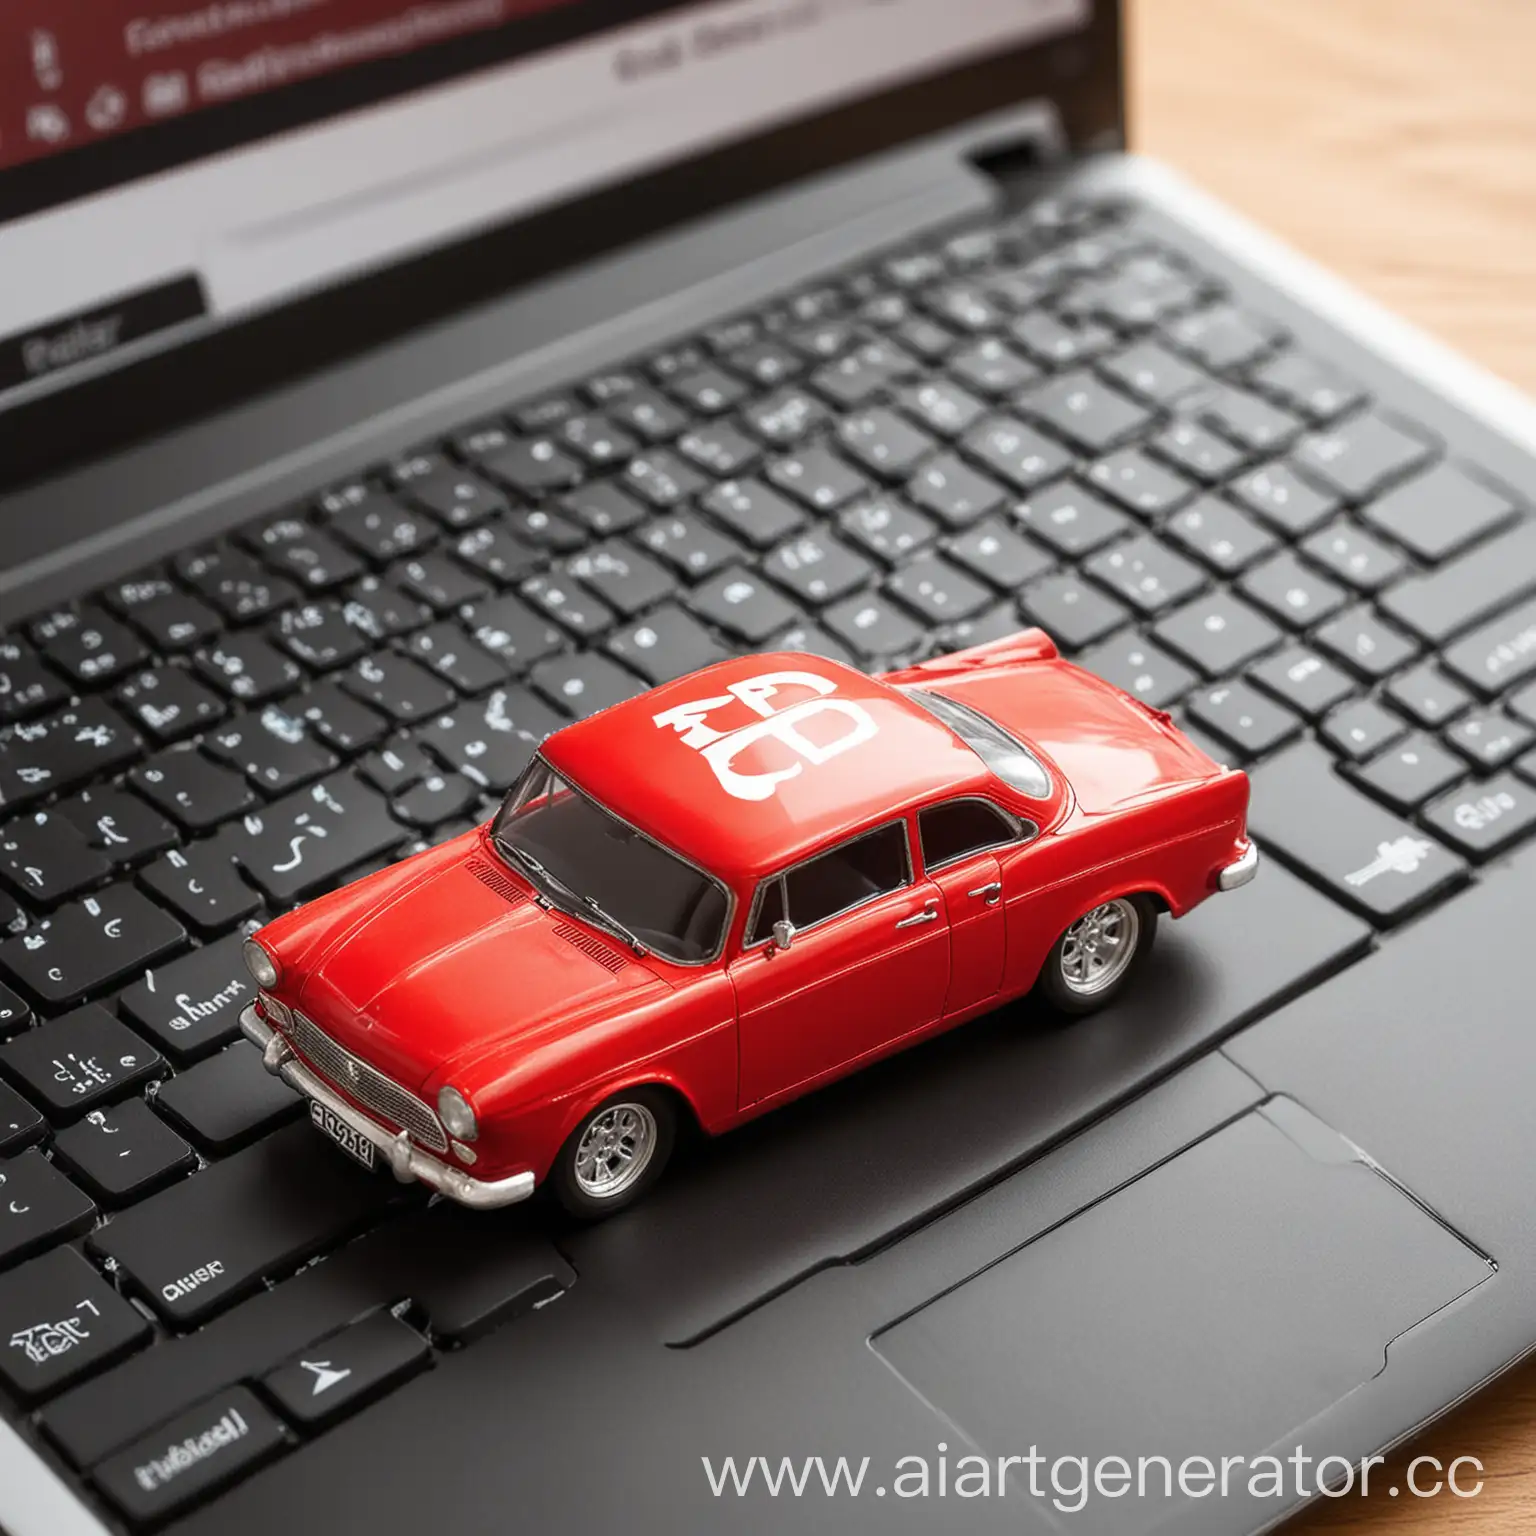 Red-Car-Toy-on-Laptop-with-RedCar-Inscription